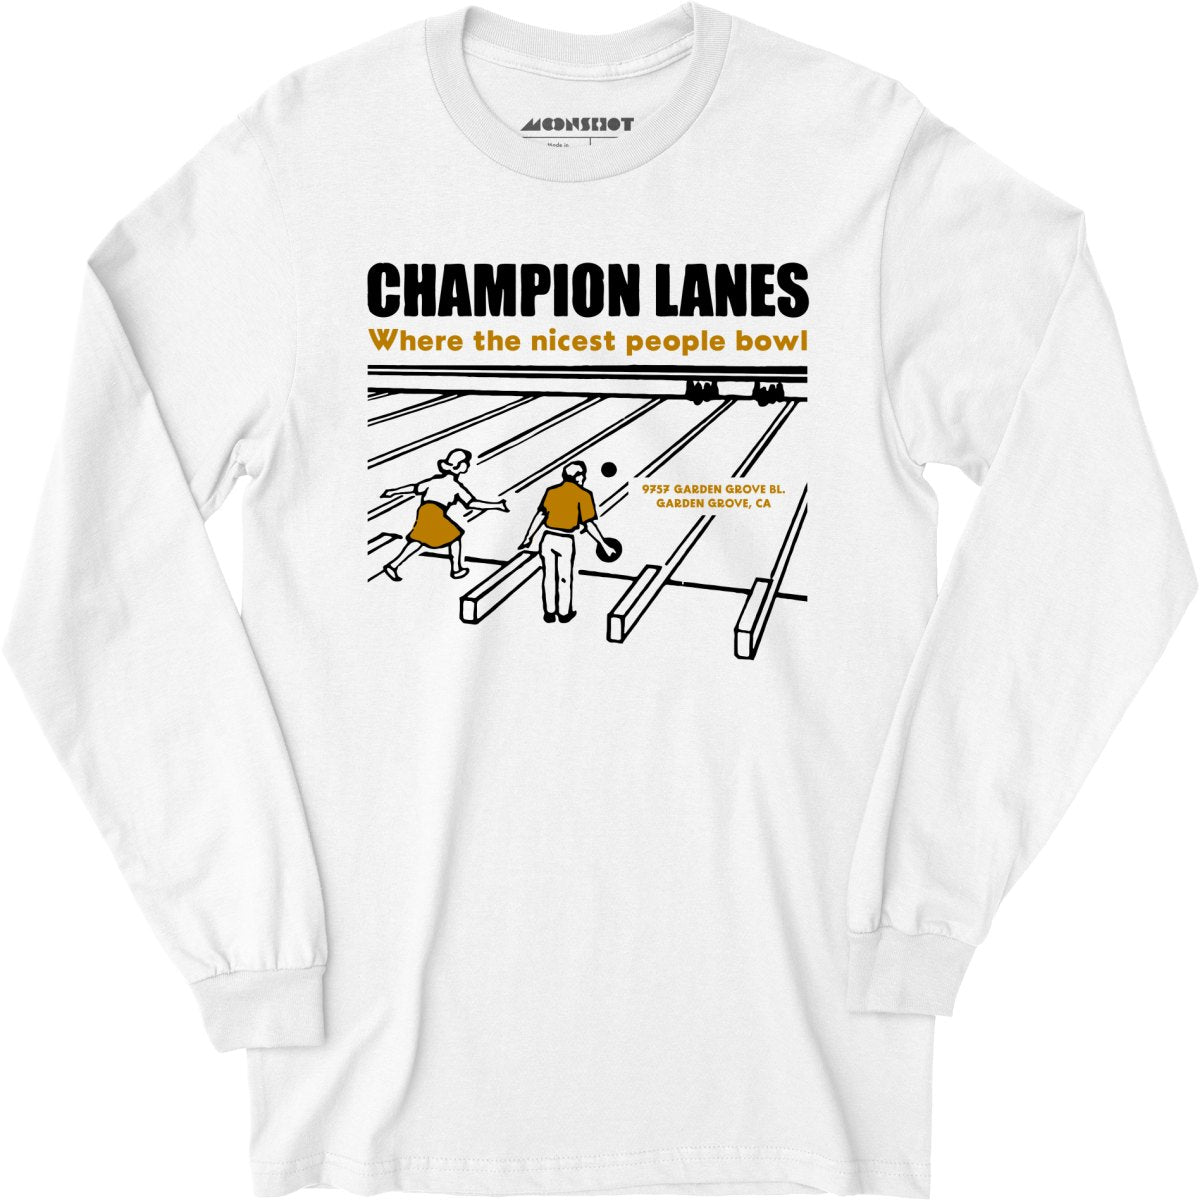 Champion Lanes - Garden Grove, CA - Vintage Bowling Alley - Long Sleeve T-Shirt